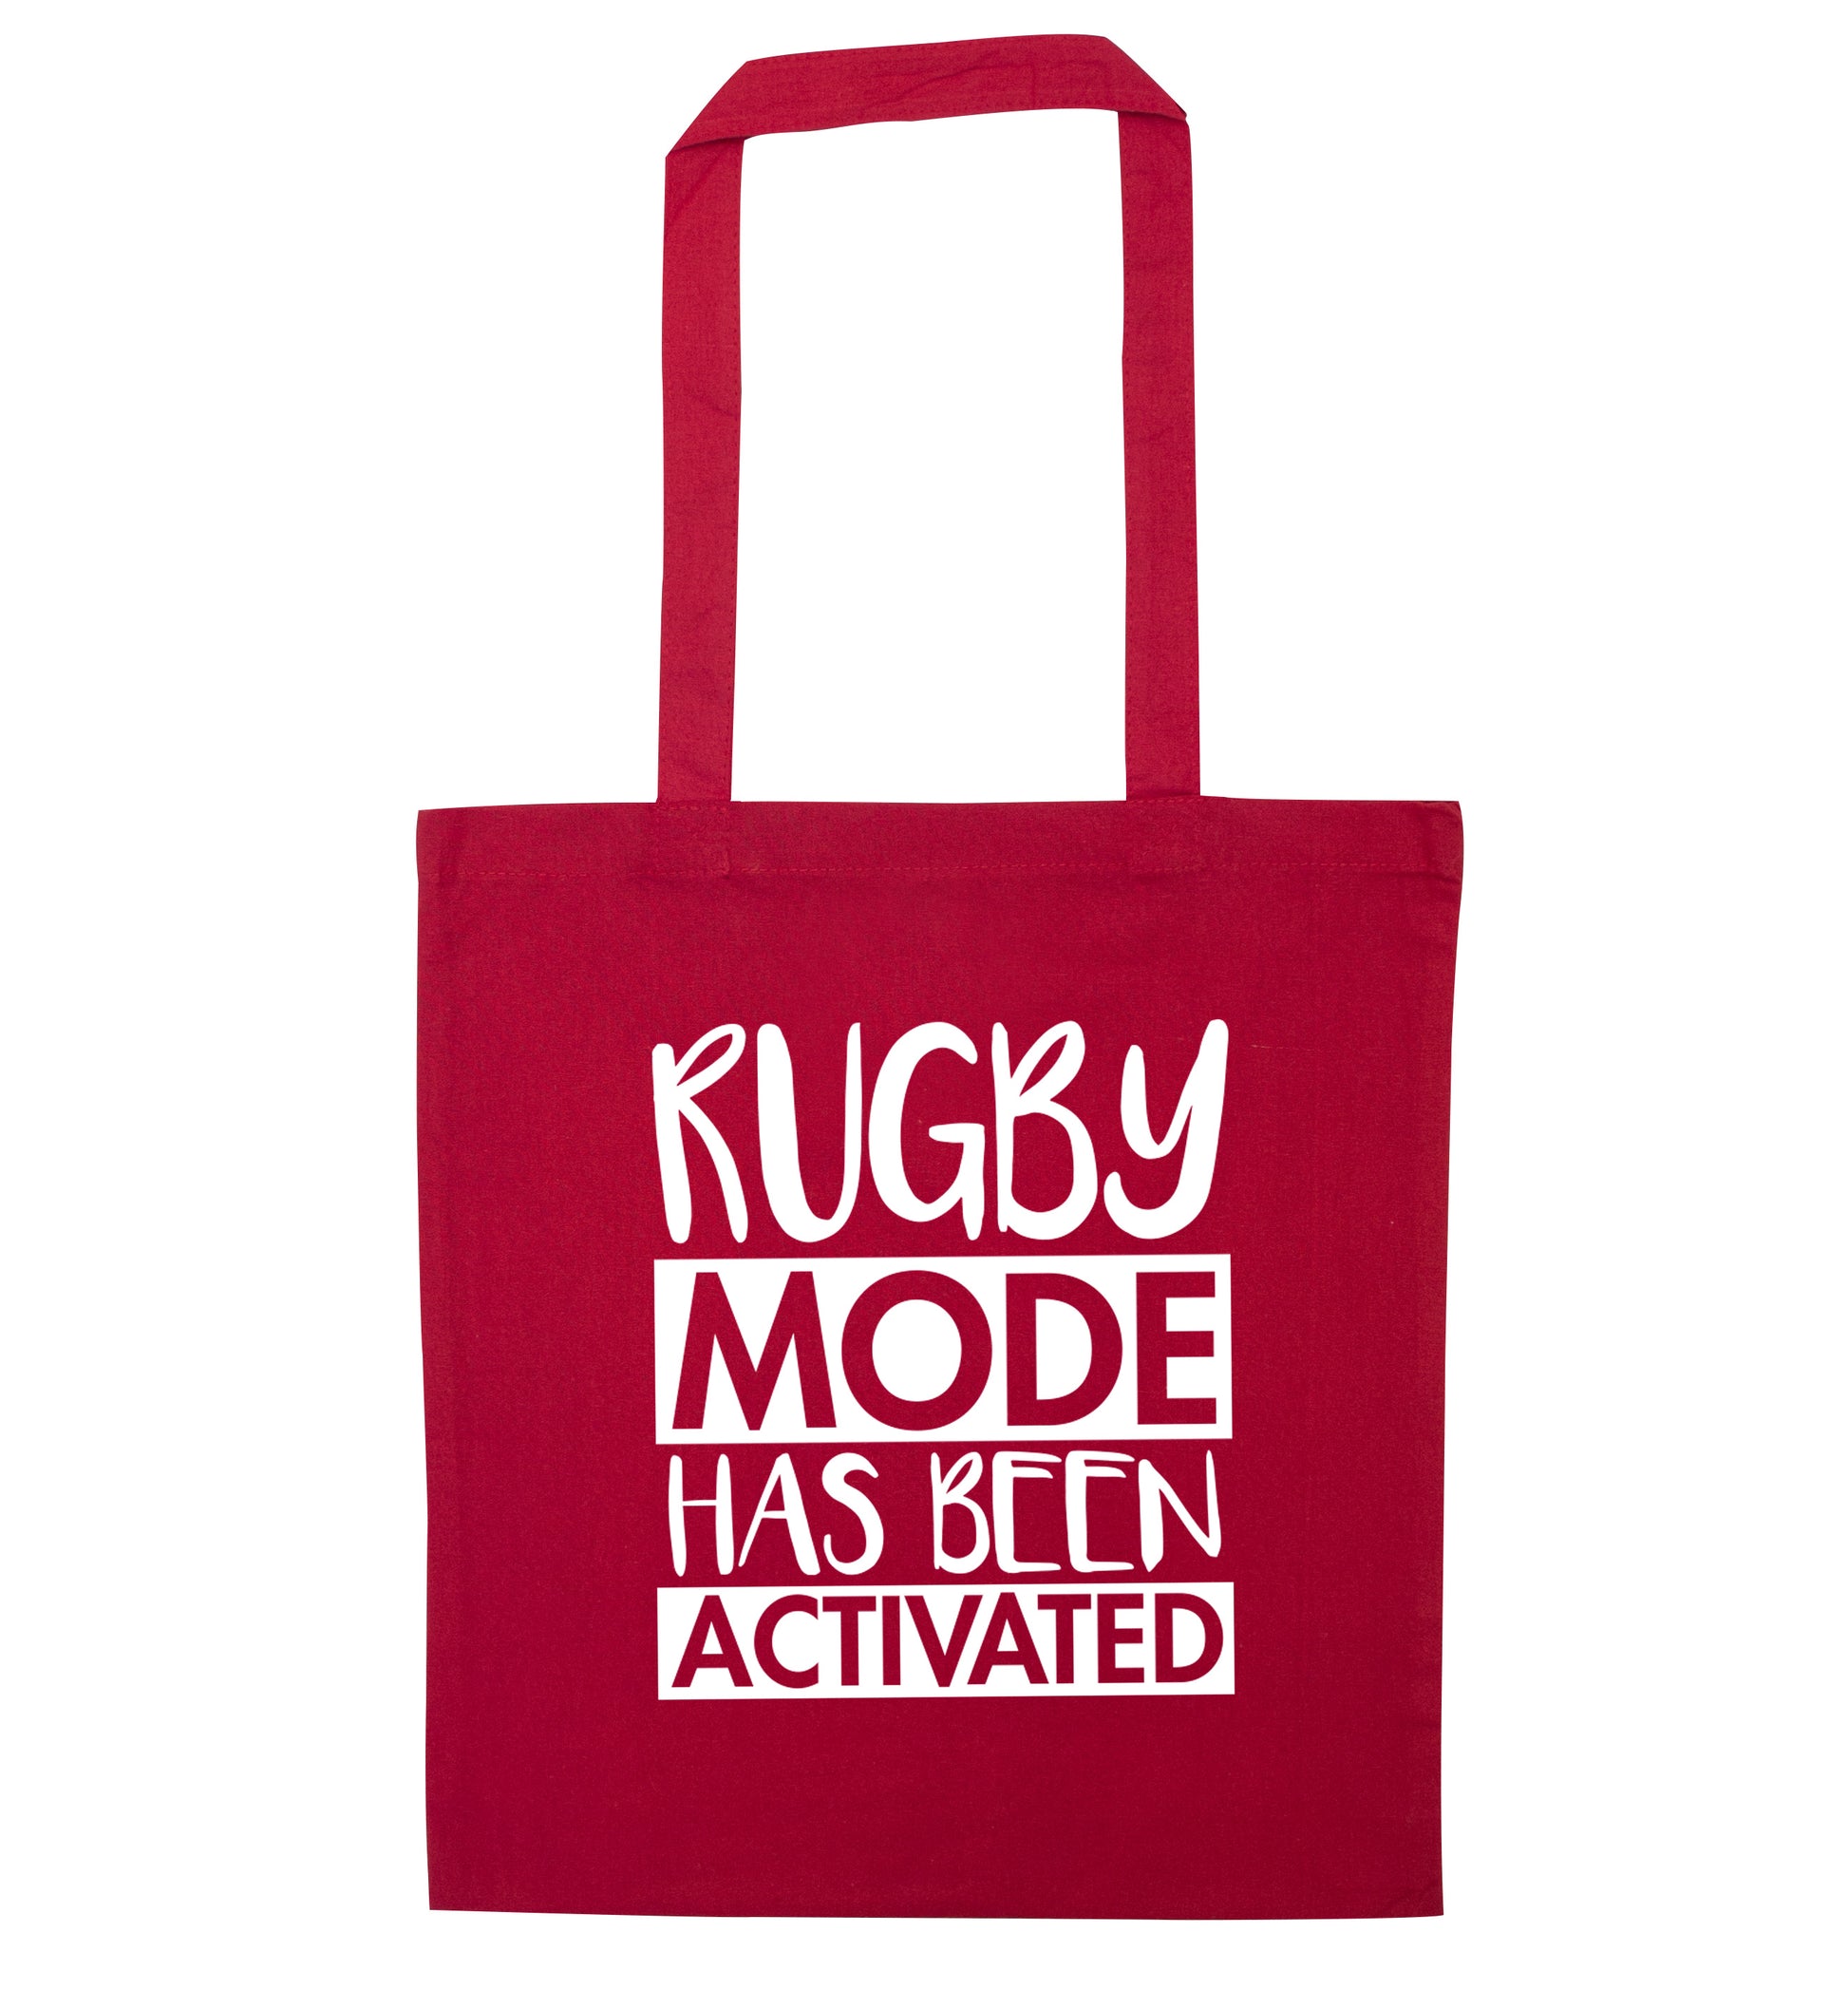 Rugby mode activated red tote bag